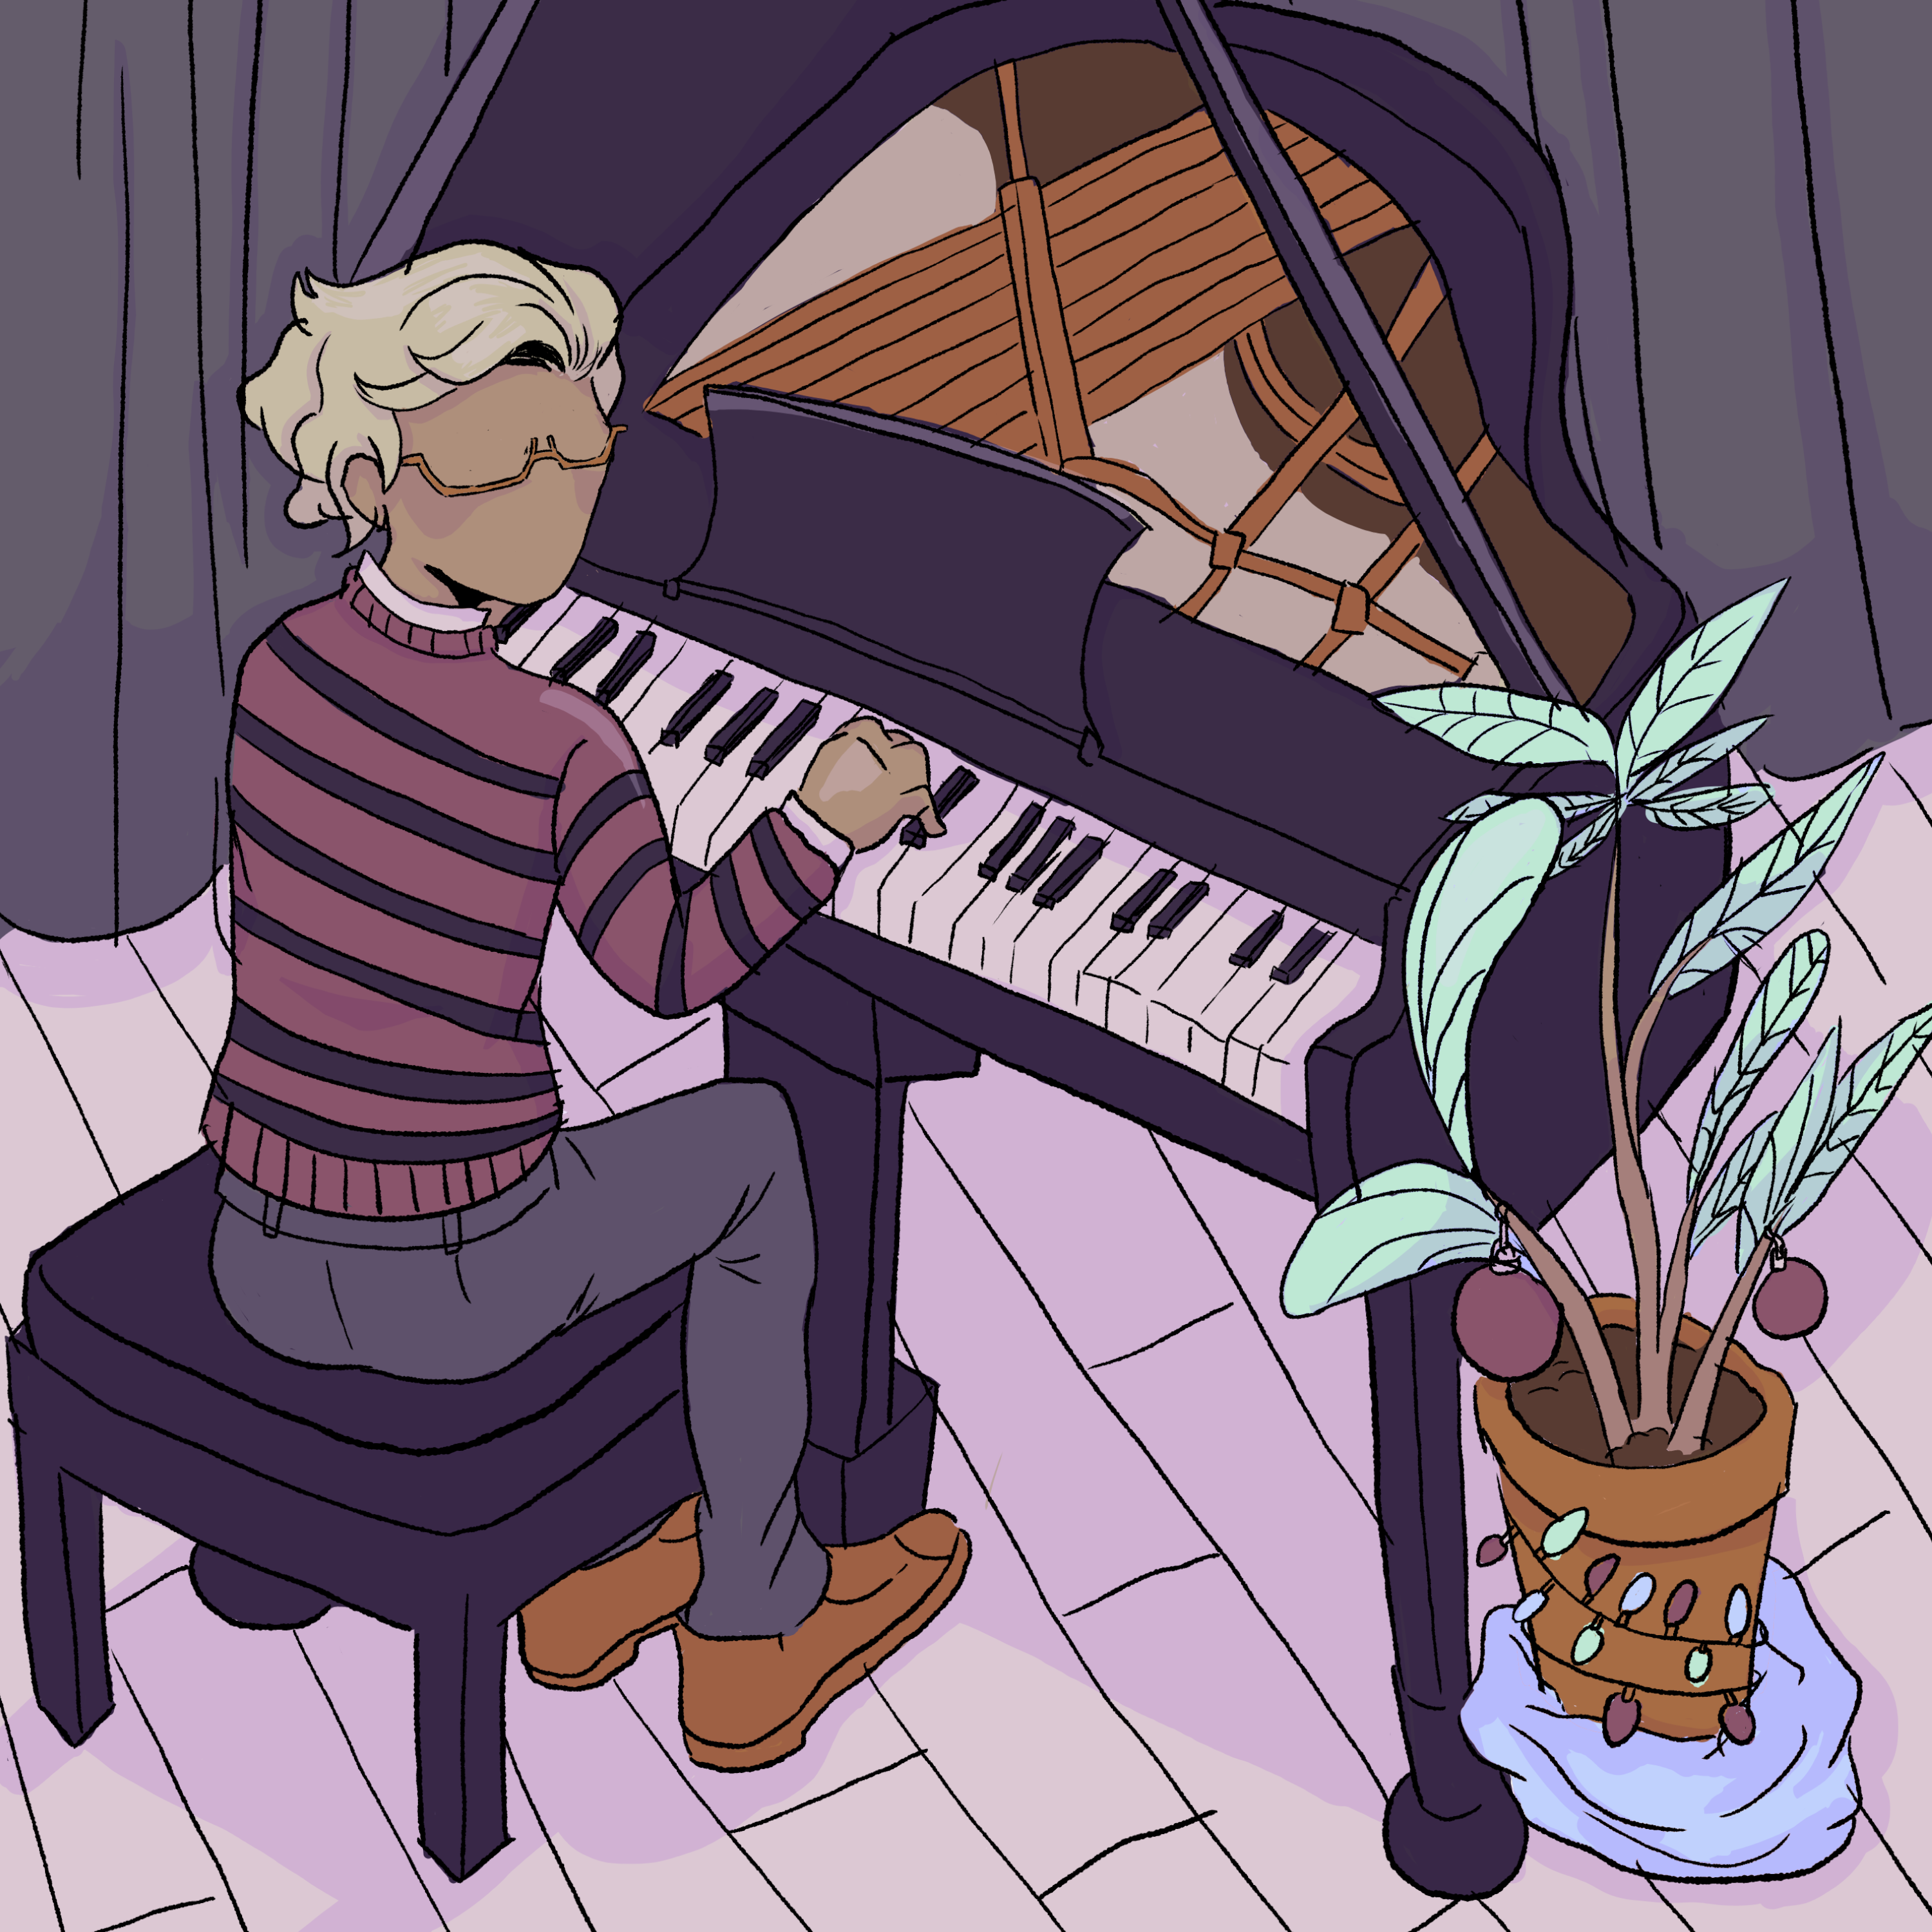 an album cover 4 dulai!!! blonde dude playing piano. probably schroeder. december album.